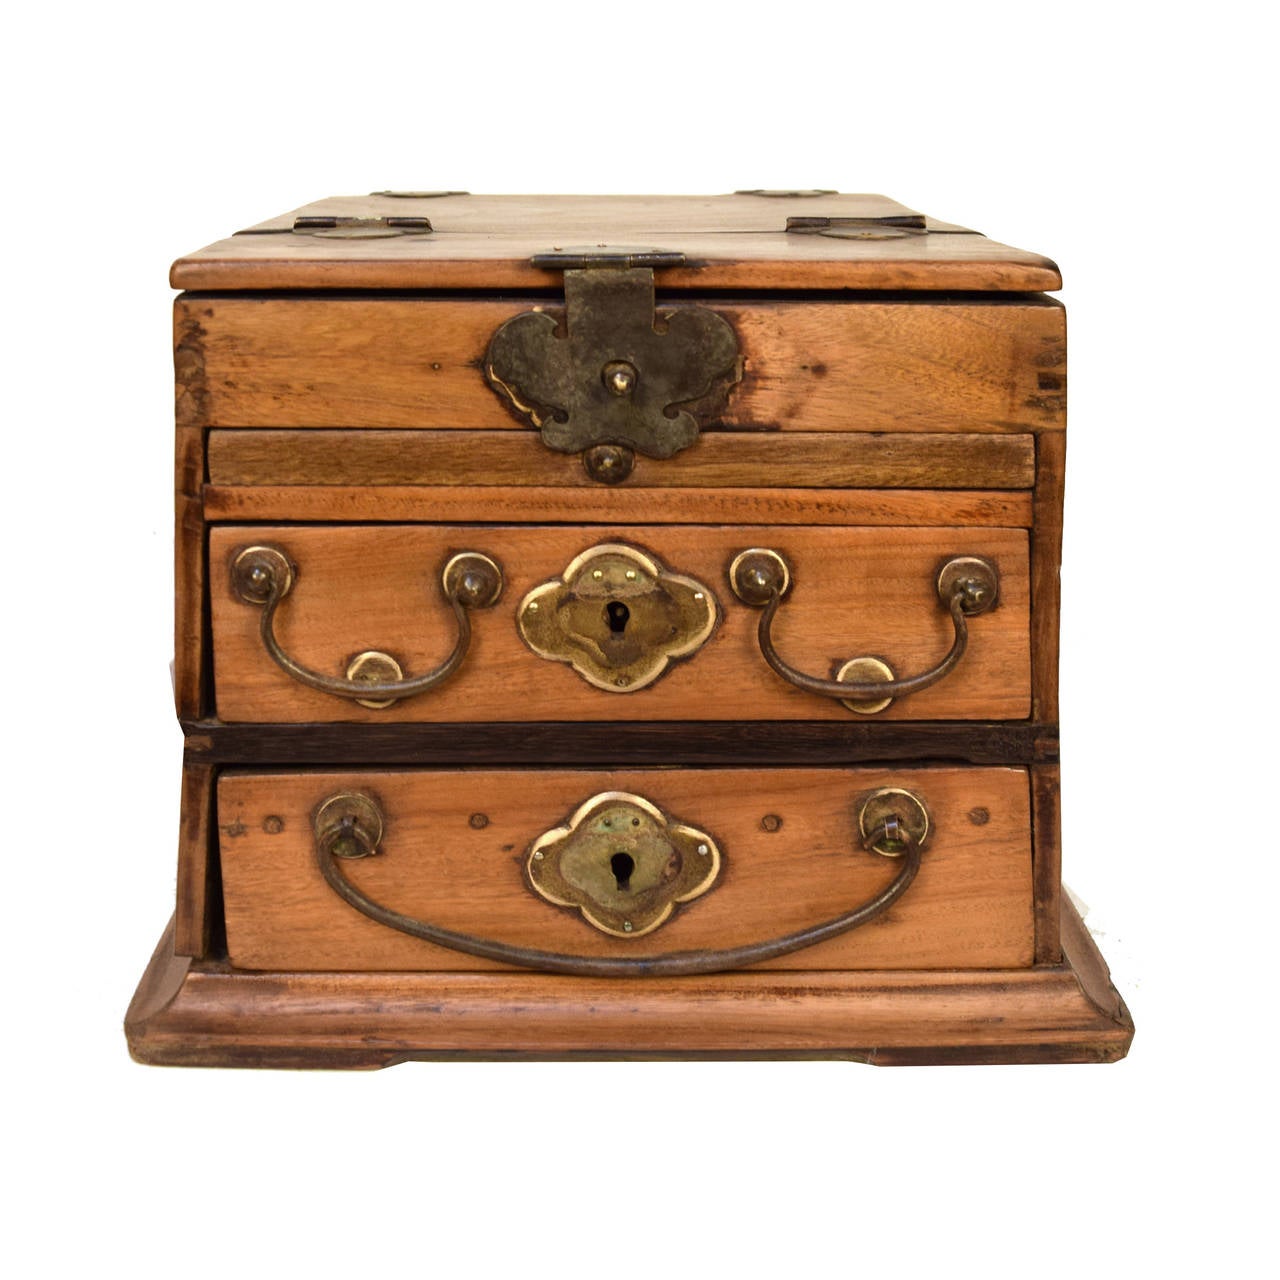 A c. 1900 vanity box from Jiangsu Province, China made of golden birch wood, which is an unusual wood respected for the way it glows. This box features two drawers and a mirror that folds out from the top.

9